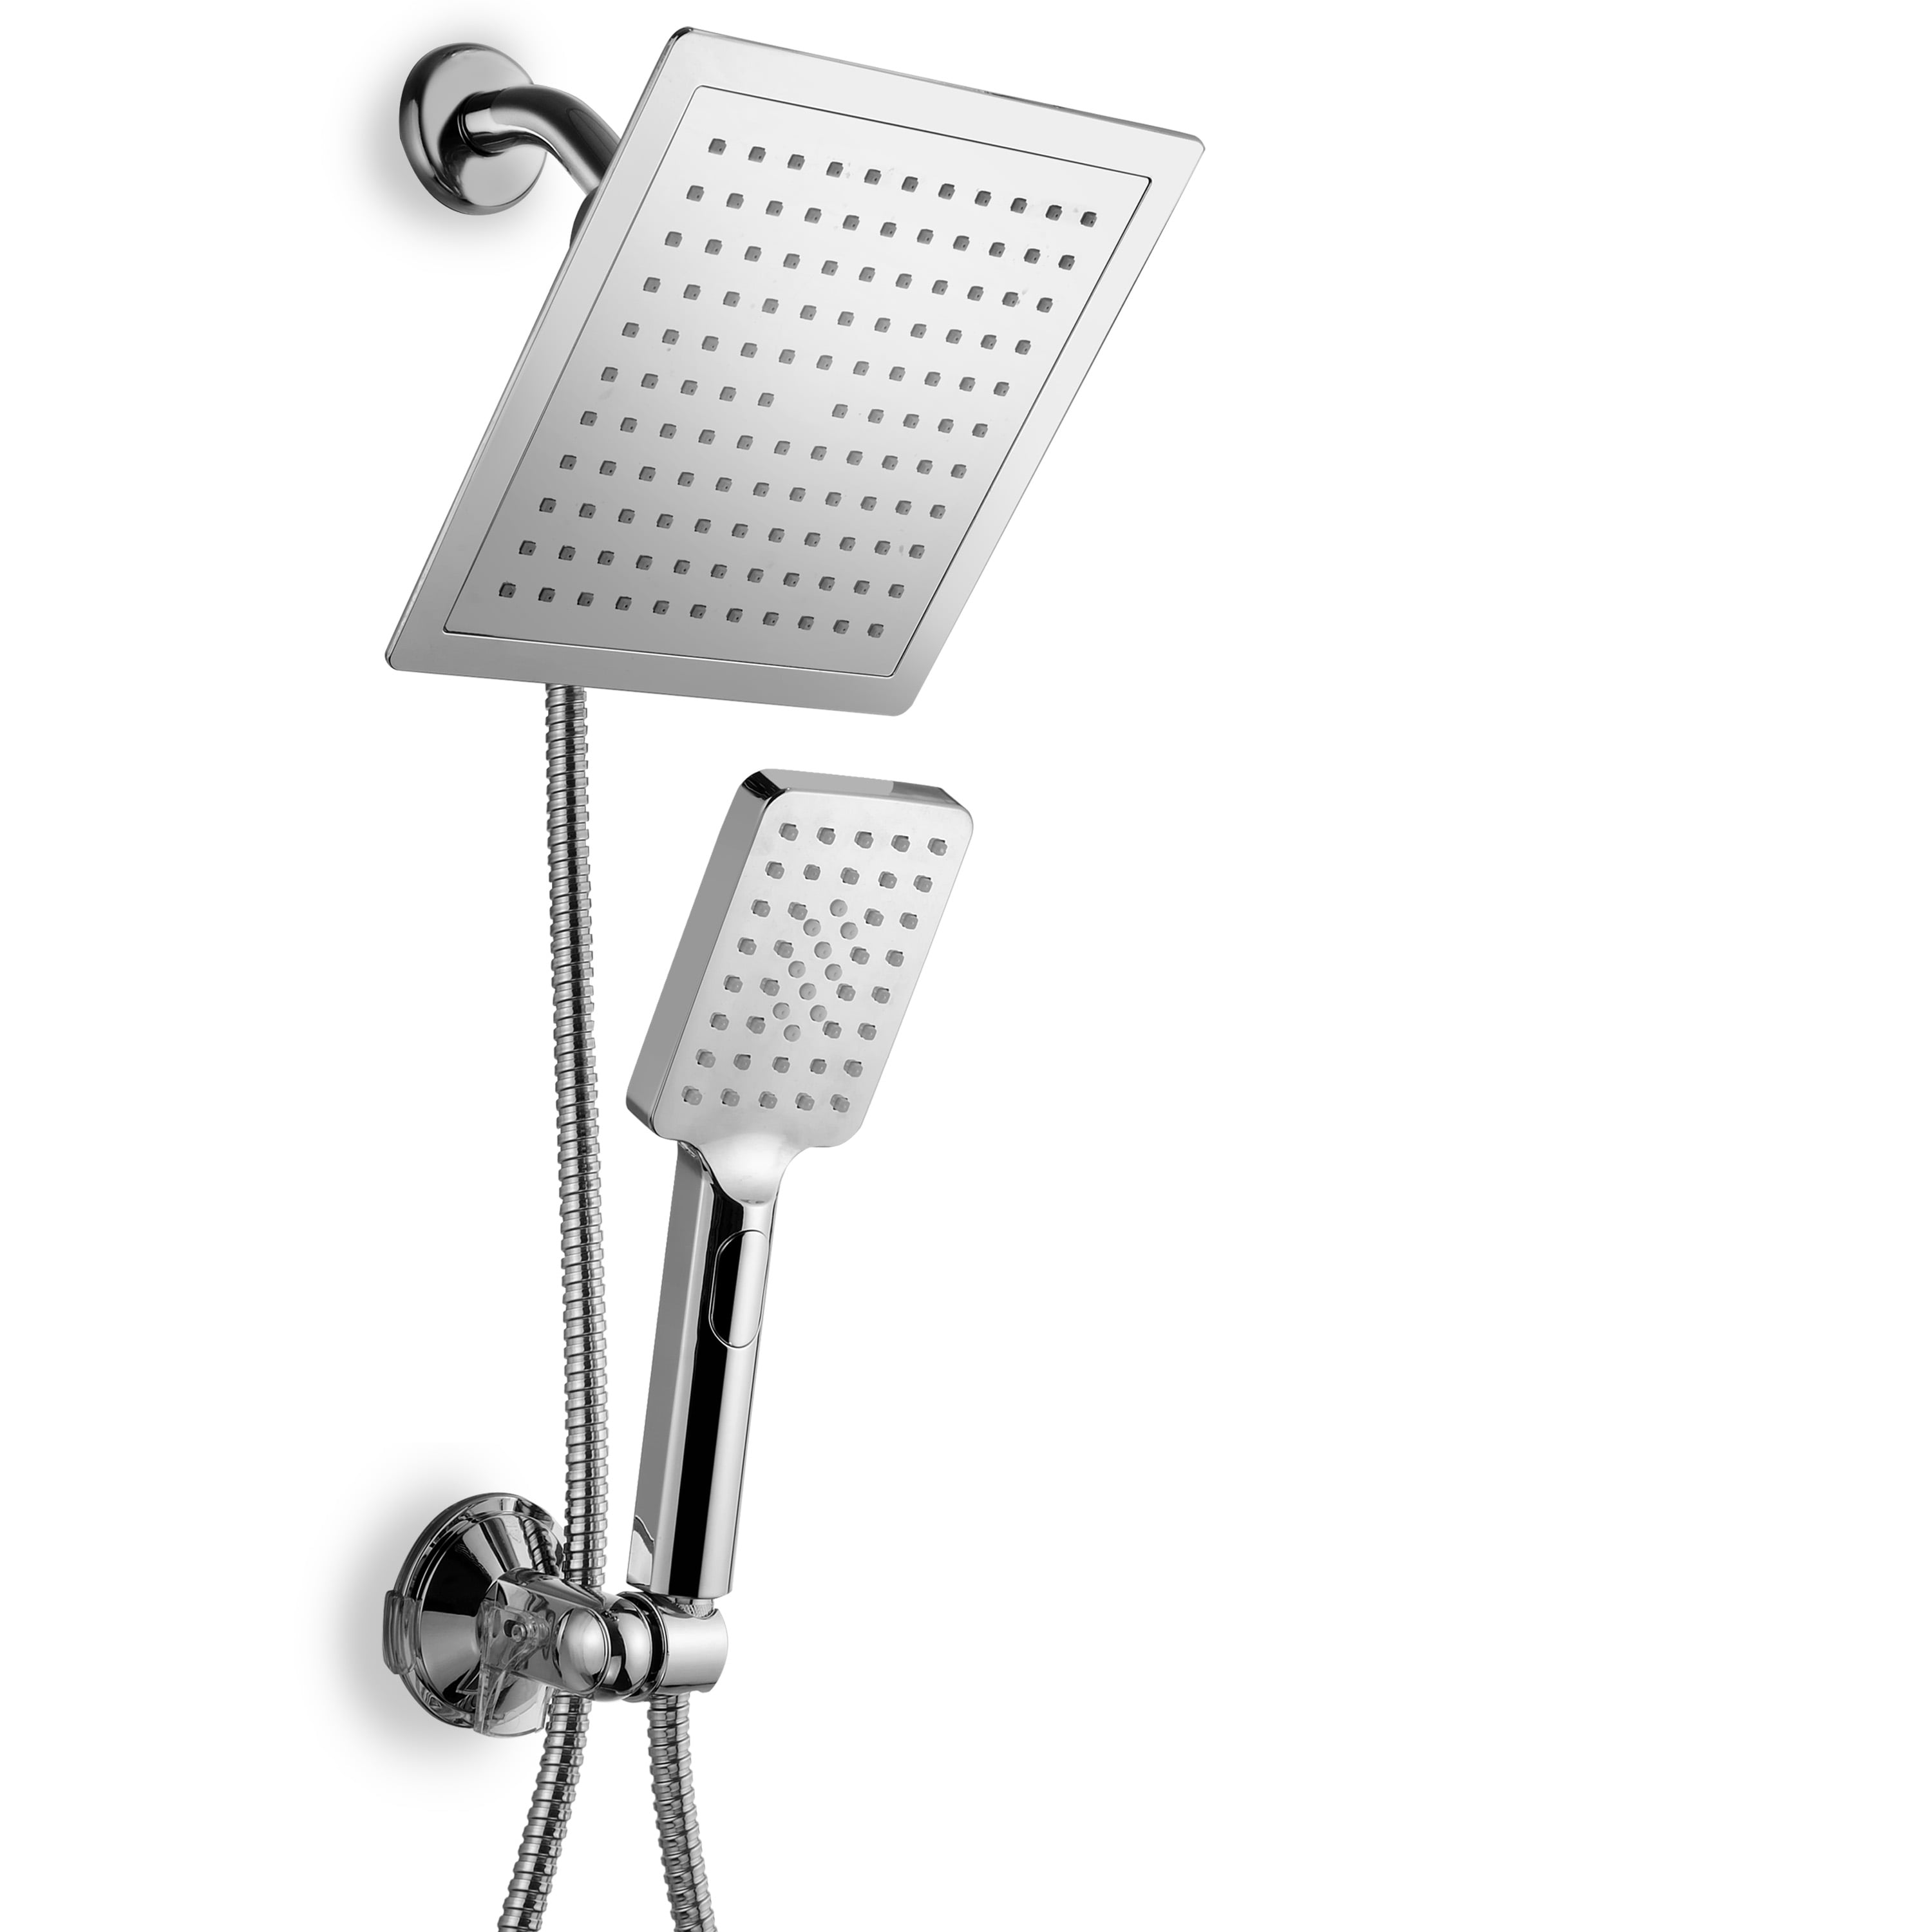 DreamSpa Luxury 9" Rainfall Shower Head Combo With Flow Control Button 